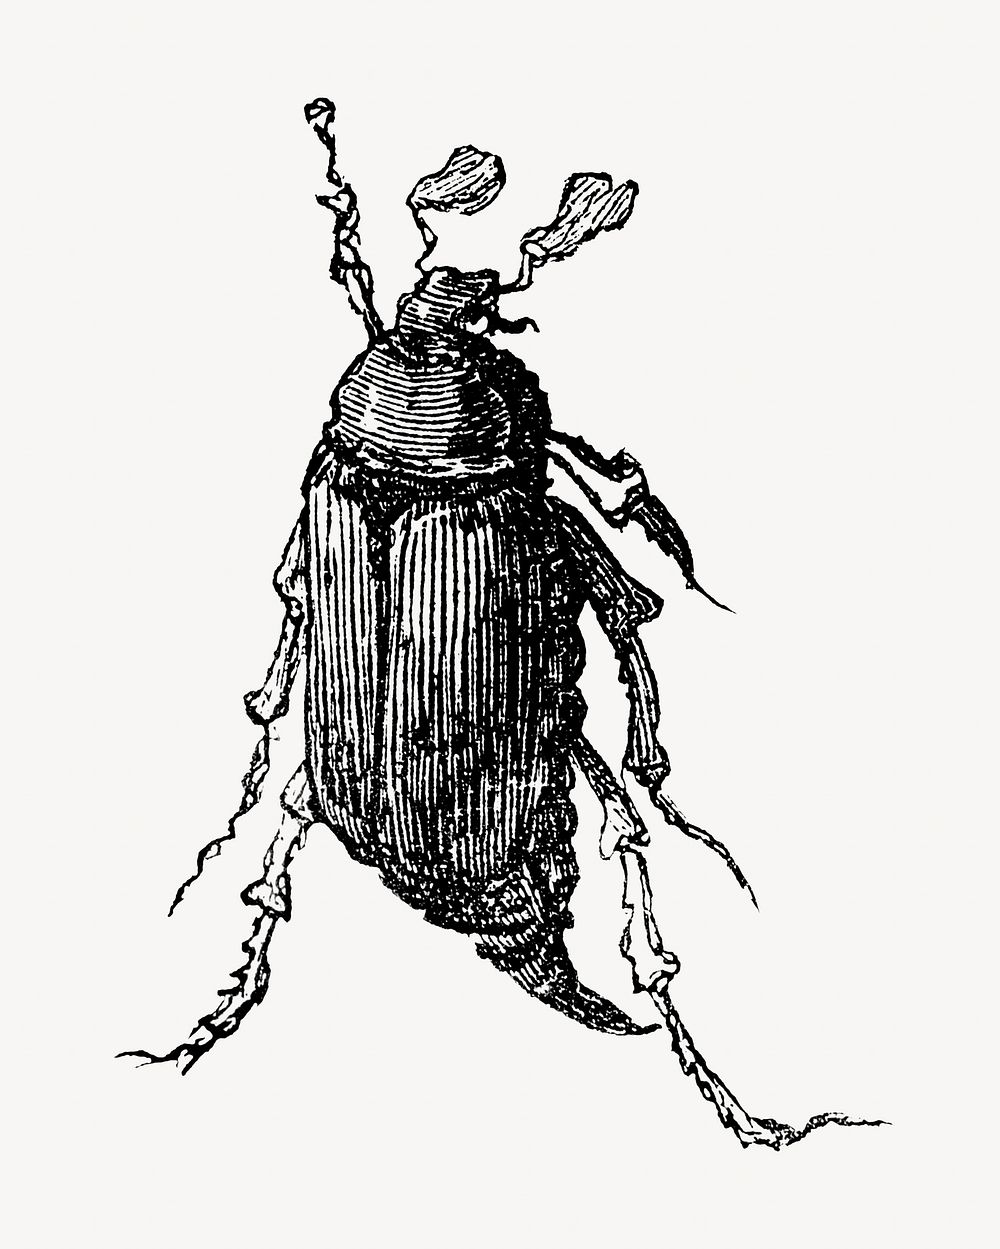 Dung beetle, vintage insect illustration by François-Frédéric Grobon. Remixed by rawpixel.